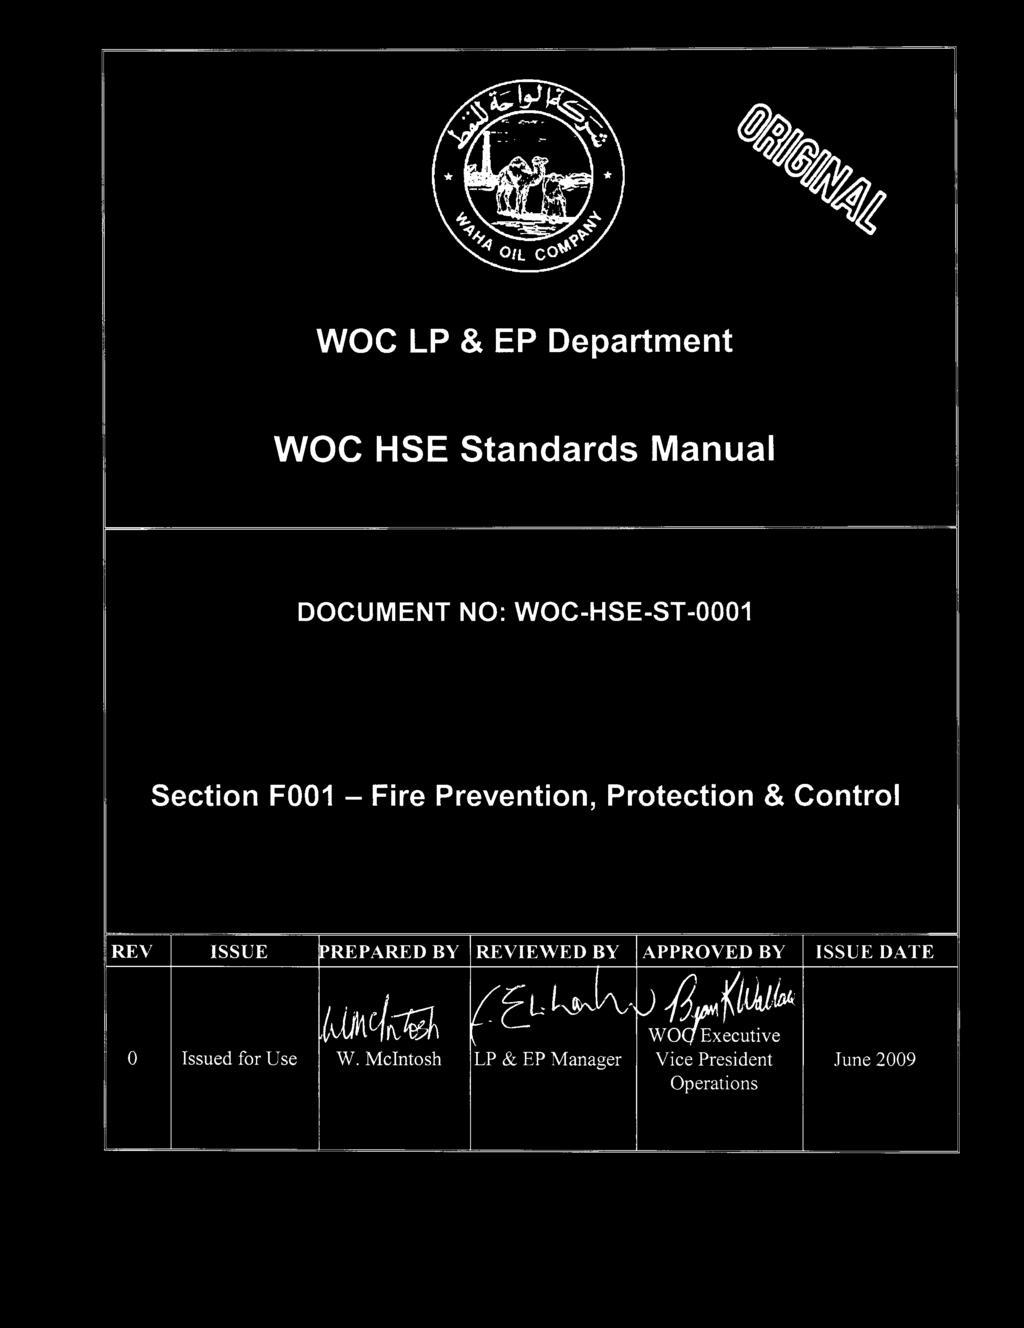 F001 - Fire Prevention, Protection & Control REV ISSUE PREPARED BY REVIEWED BY